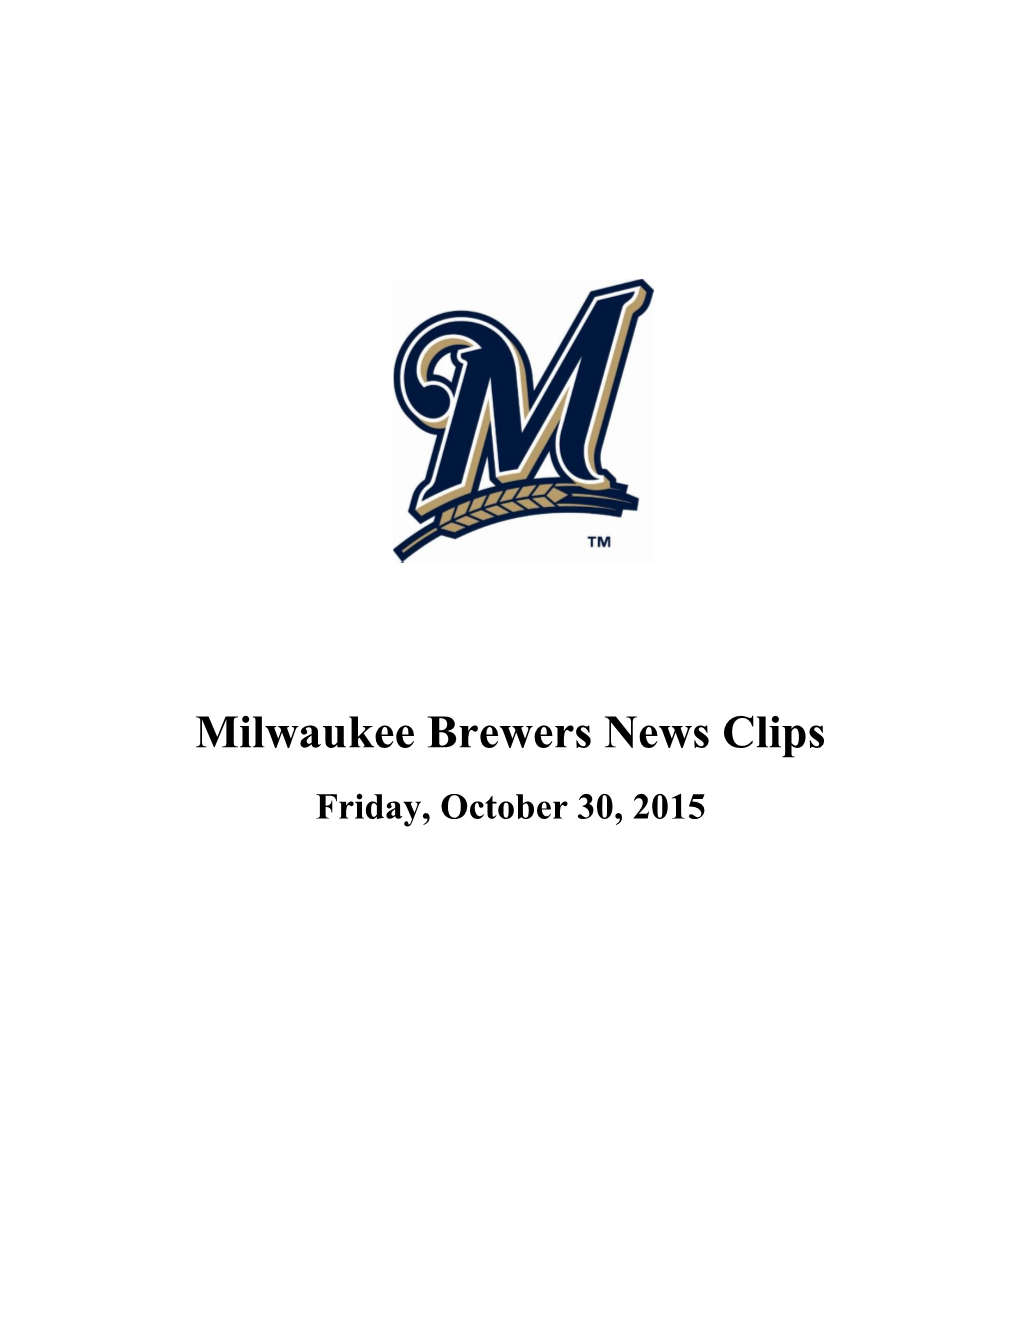 Milwaukee Brewers News Clips Friday, October 30, 2015